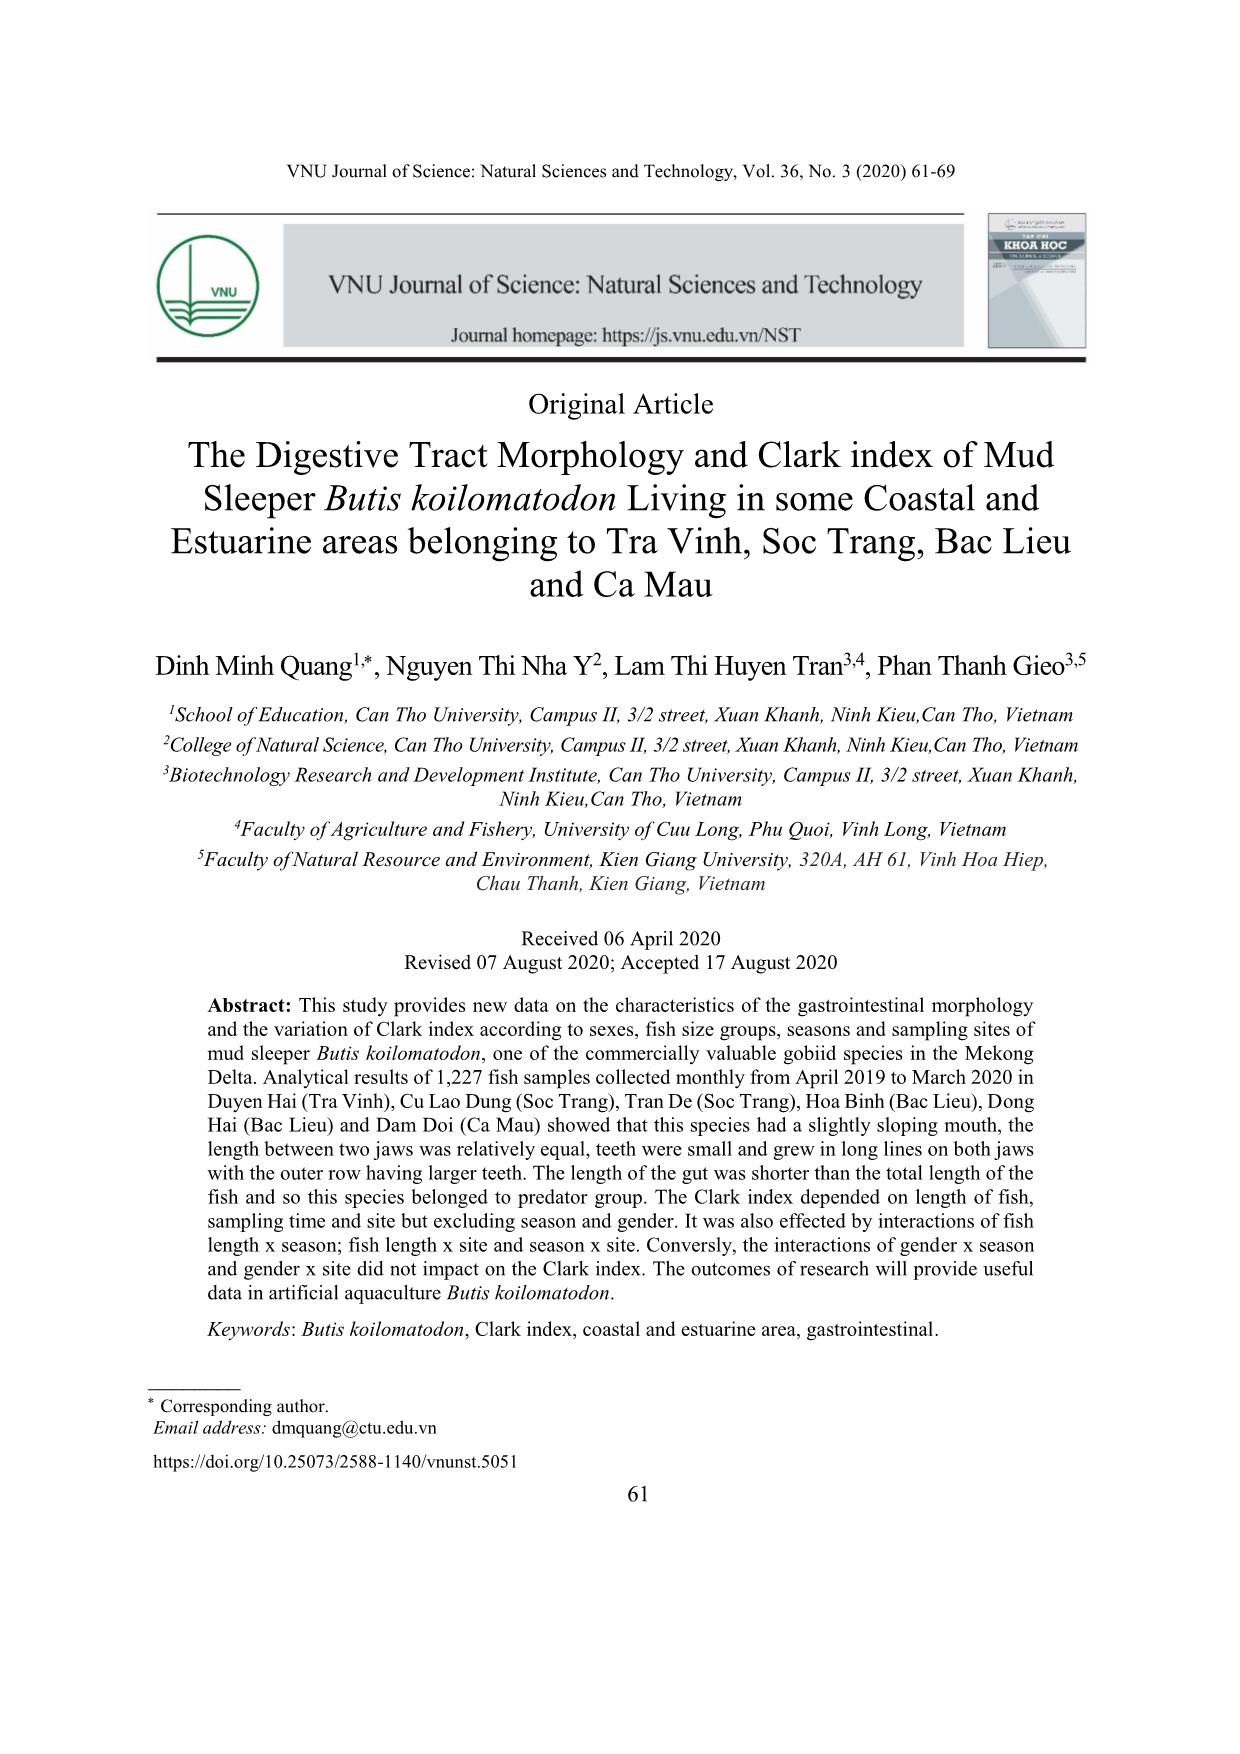 The digestive tract morphology and clark index of mud sleeper butis koilomatodon living in some coastal and estuarine areas belonging to Tra Vinh, Soc Trang, Bac Lieu and Ca Mau trang 1